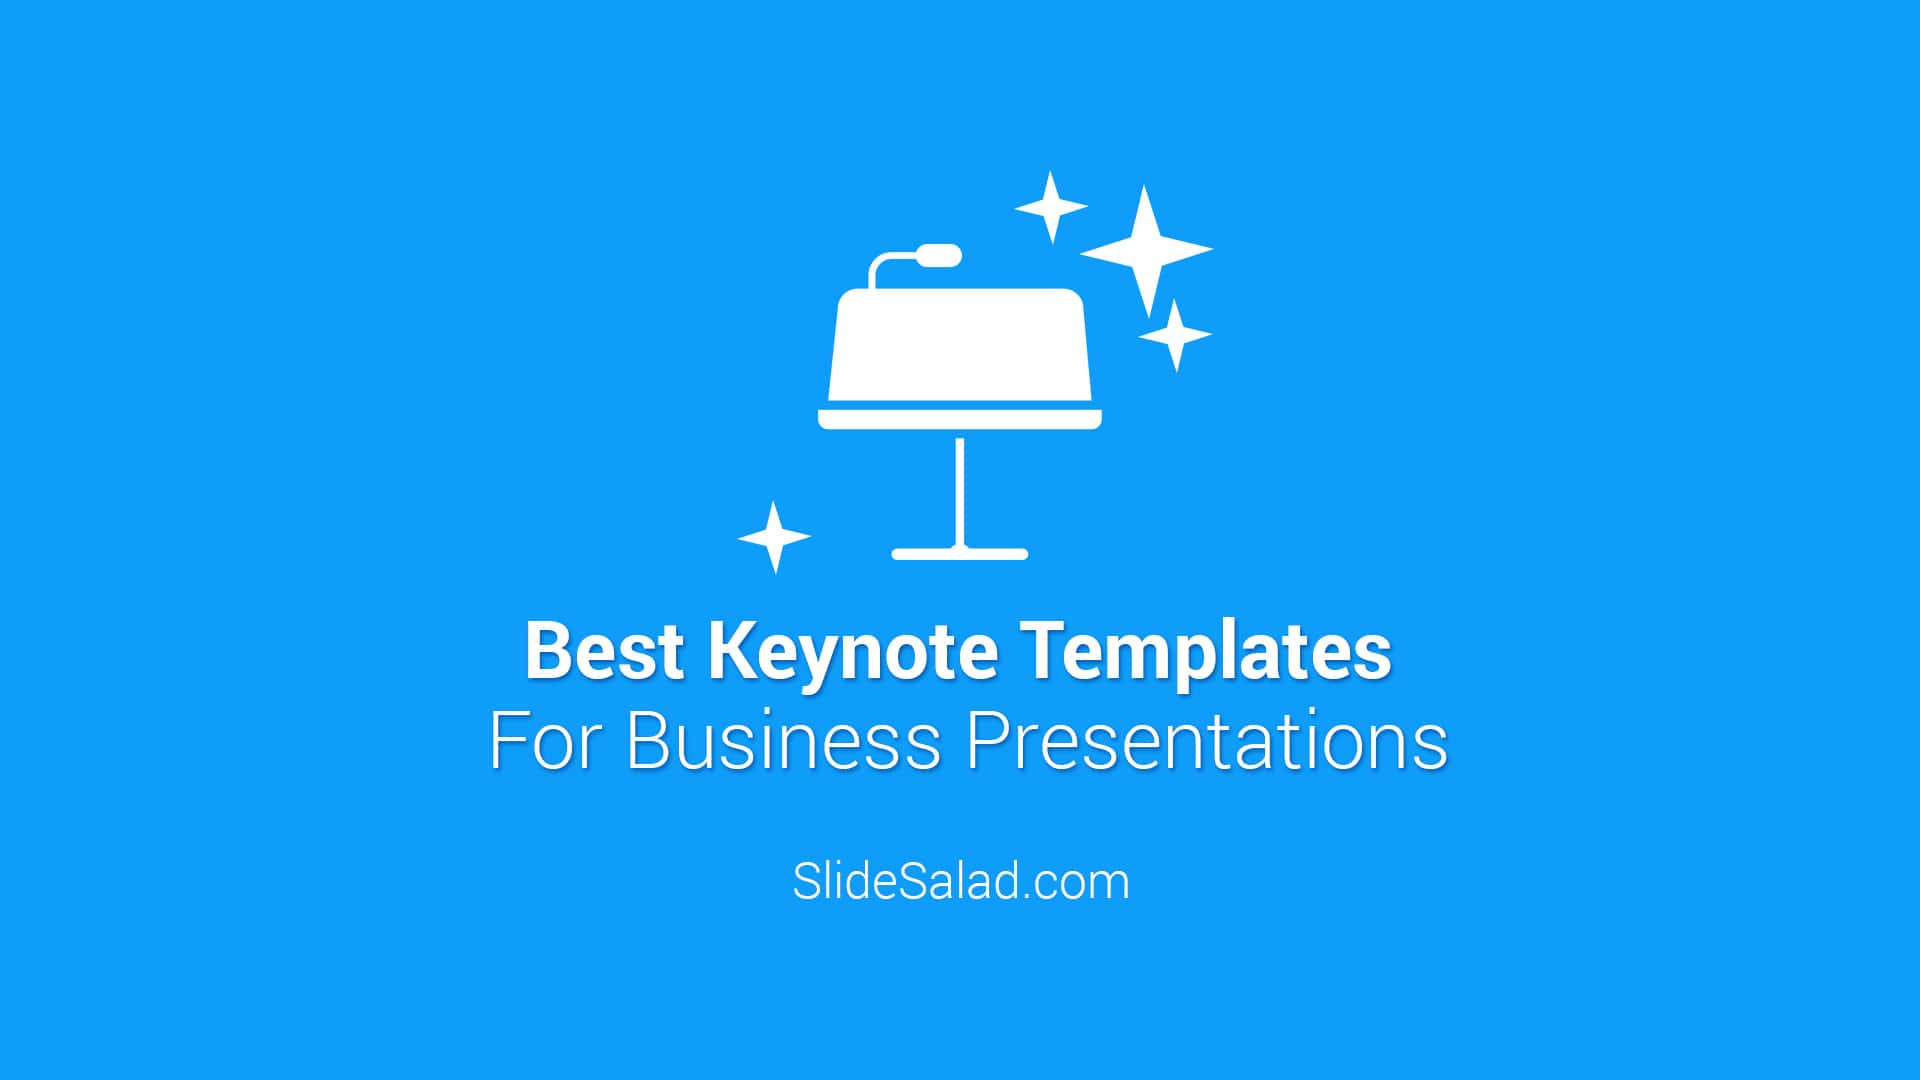 Best Keynote Templates for Business Presentations